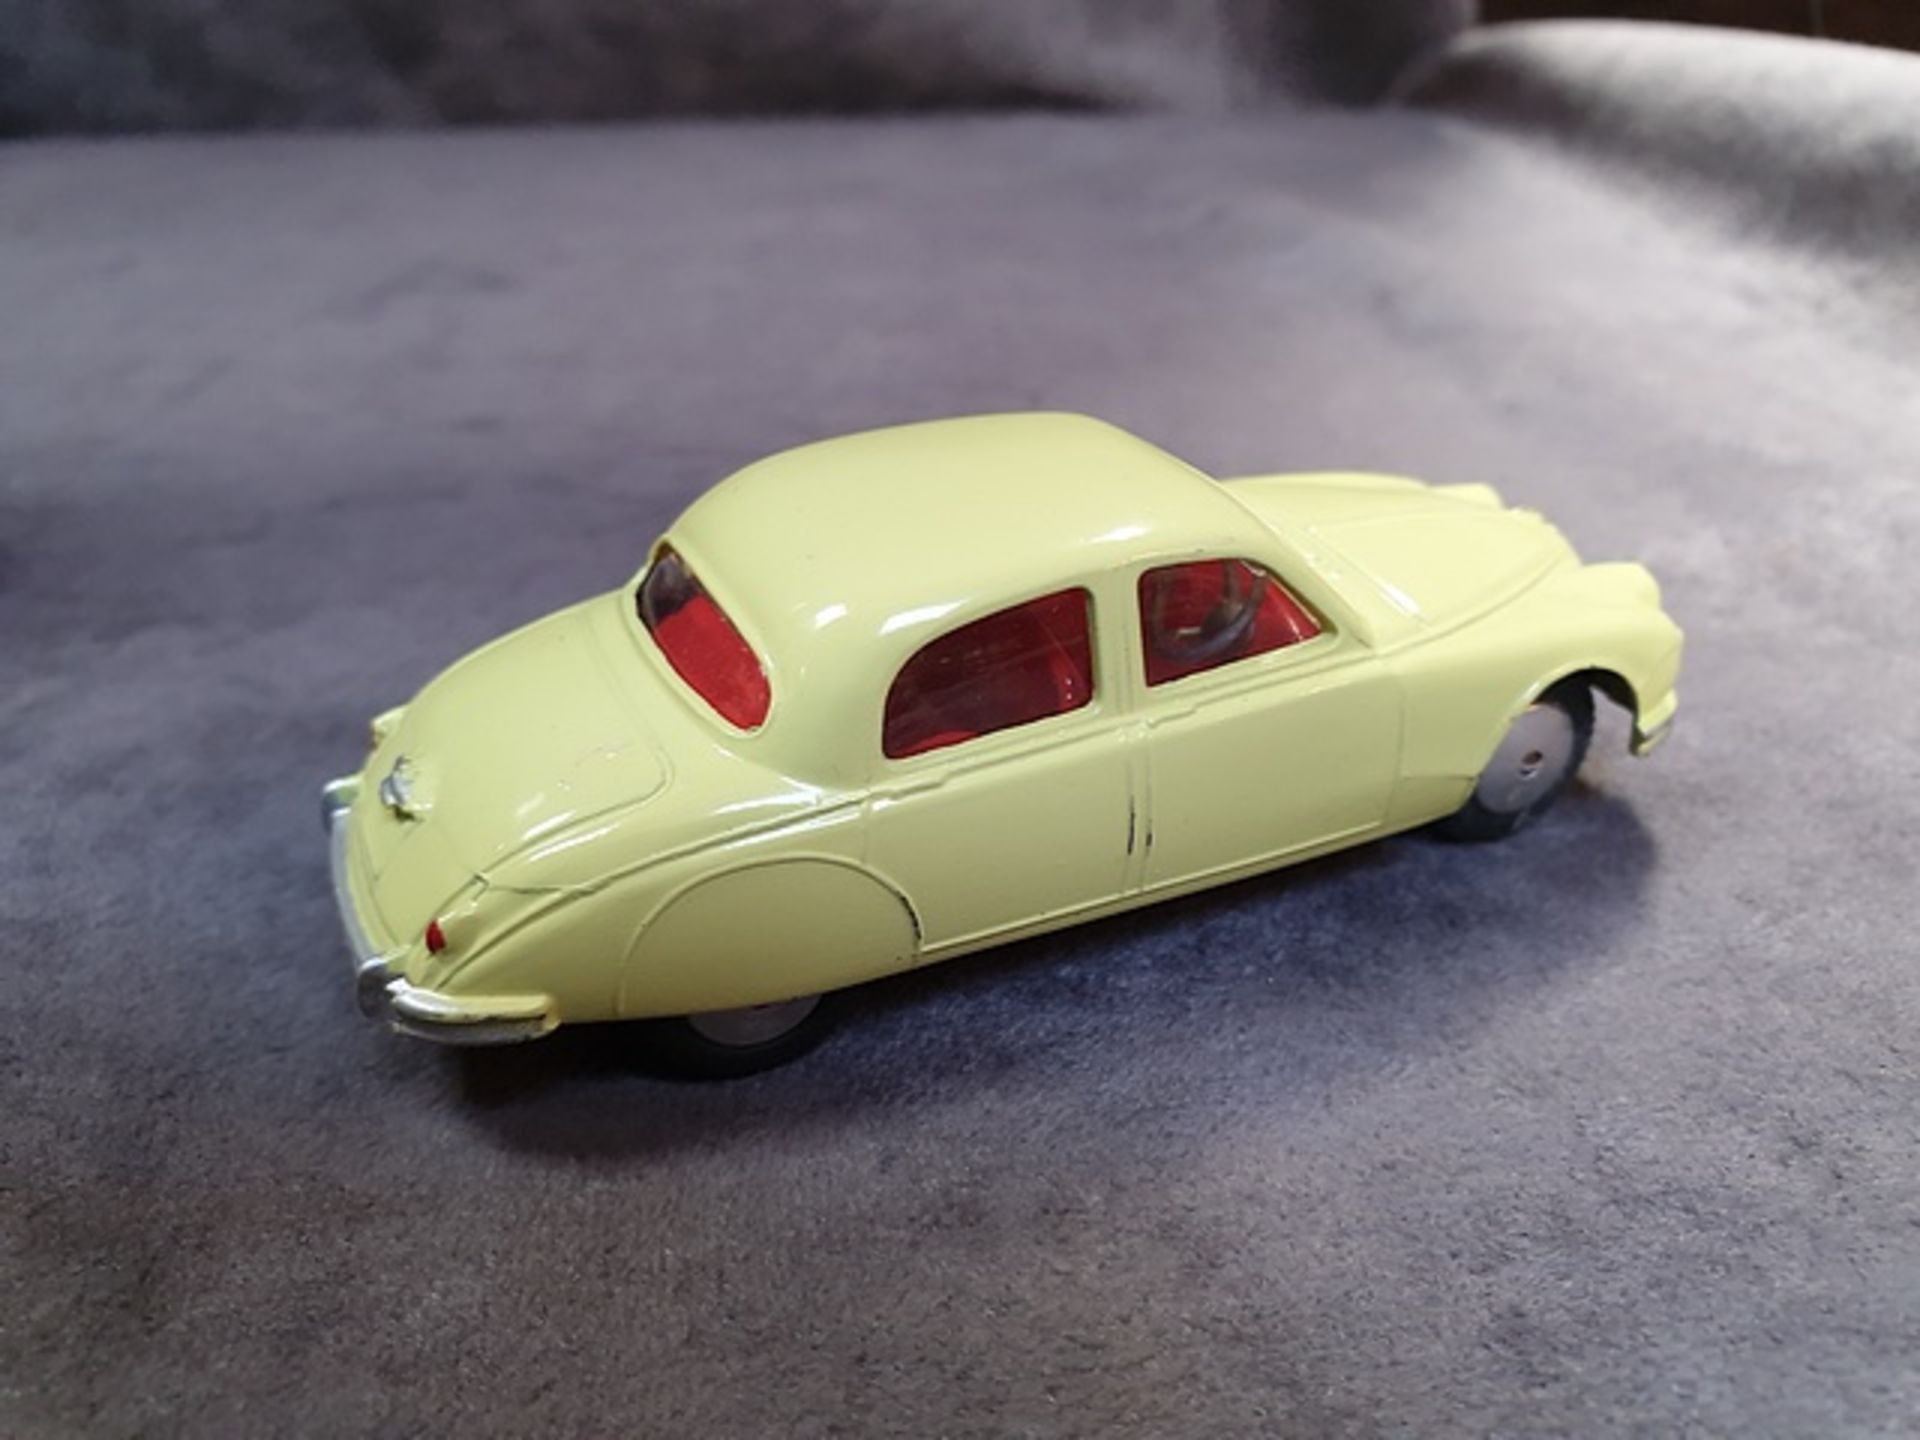 Corgi Toys diecast # 280S Jaguar 24 Litre Saloon in yellow with red interior complete in box - Image 2 of 2